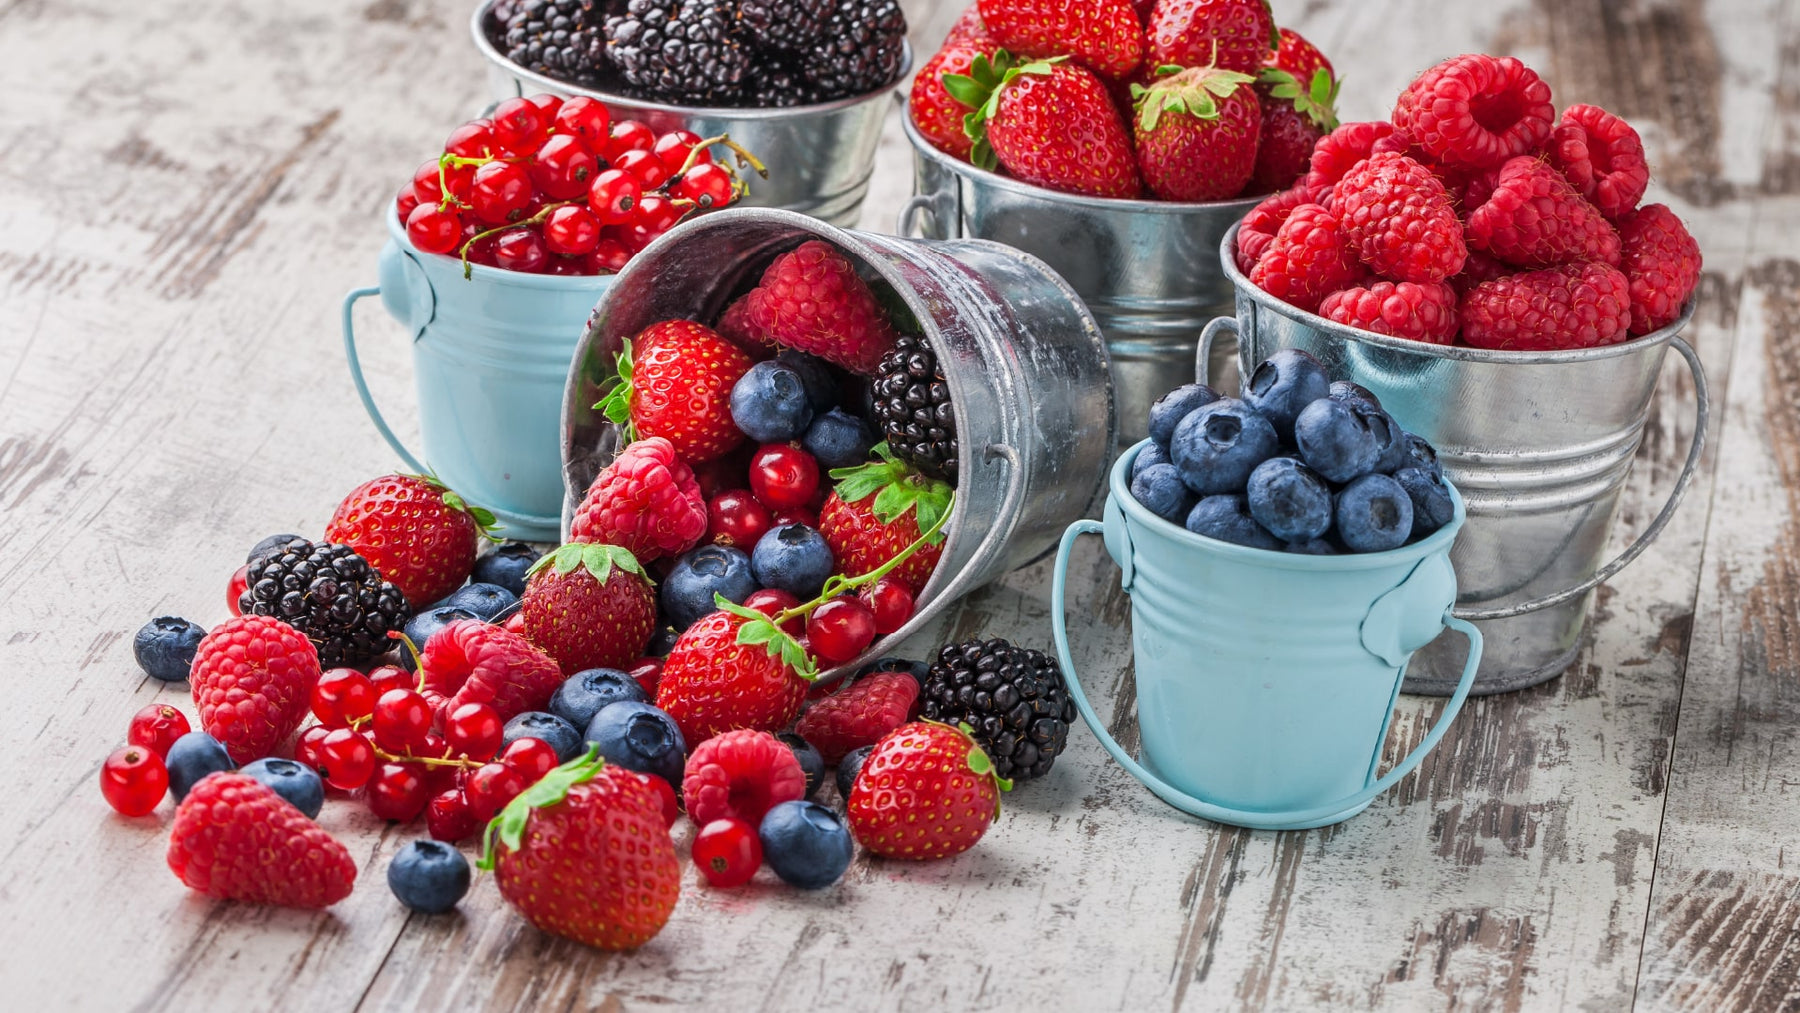 Berries on a Keto Diet: Yay or Nay?